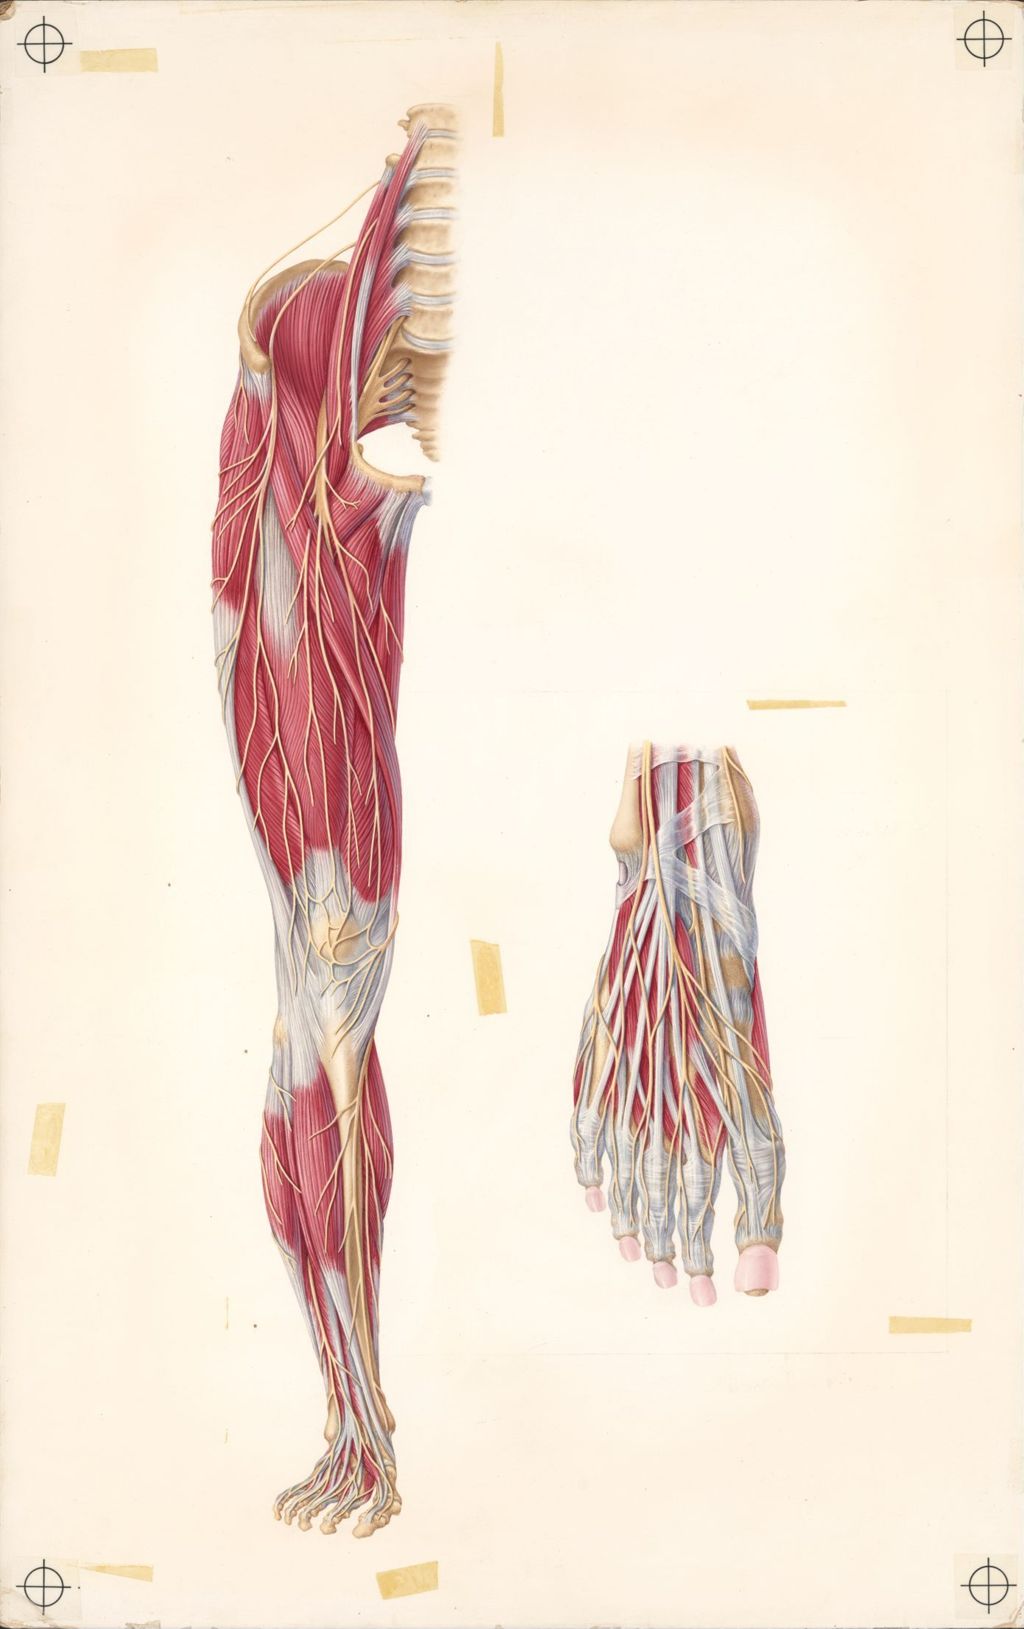 Miniature of Doctor-Patient Explanatory Atlas of Anatomy, The Cutaneous Nerves of the Lower Limb Superimposed on the Musculature